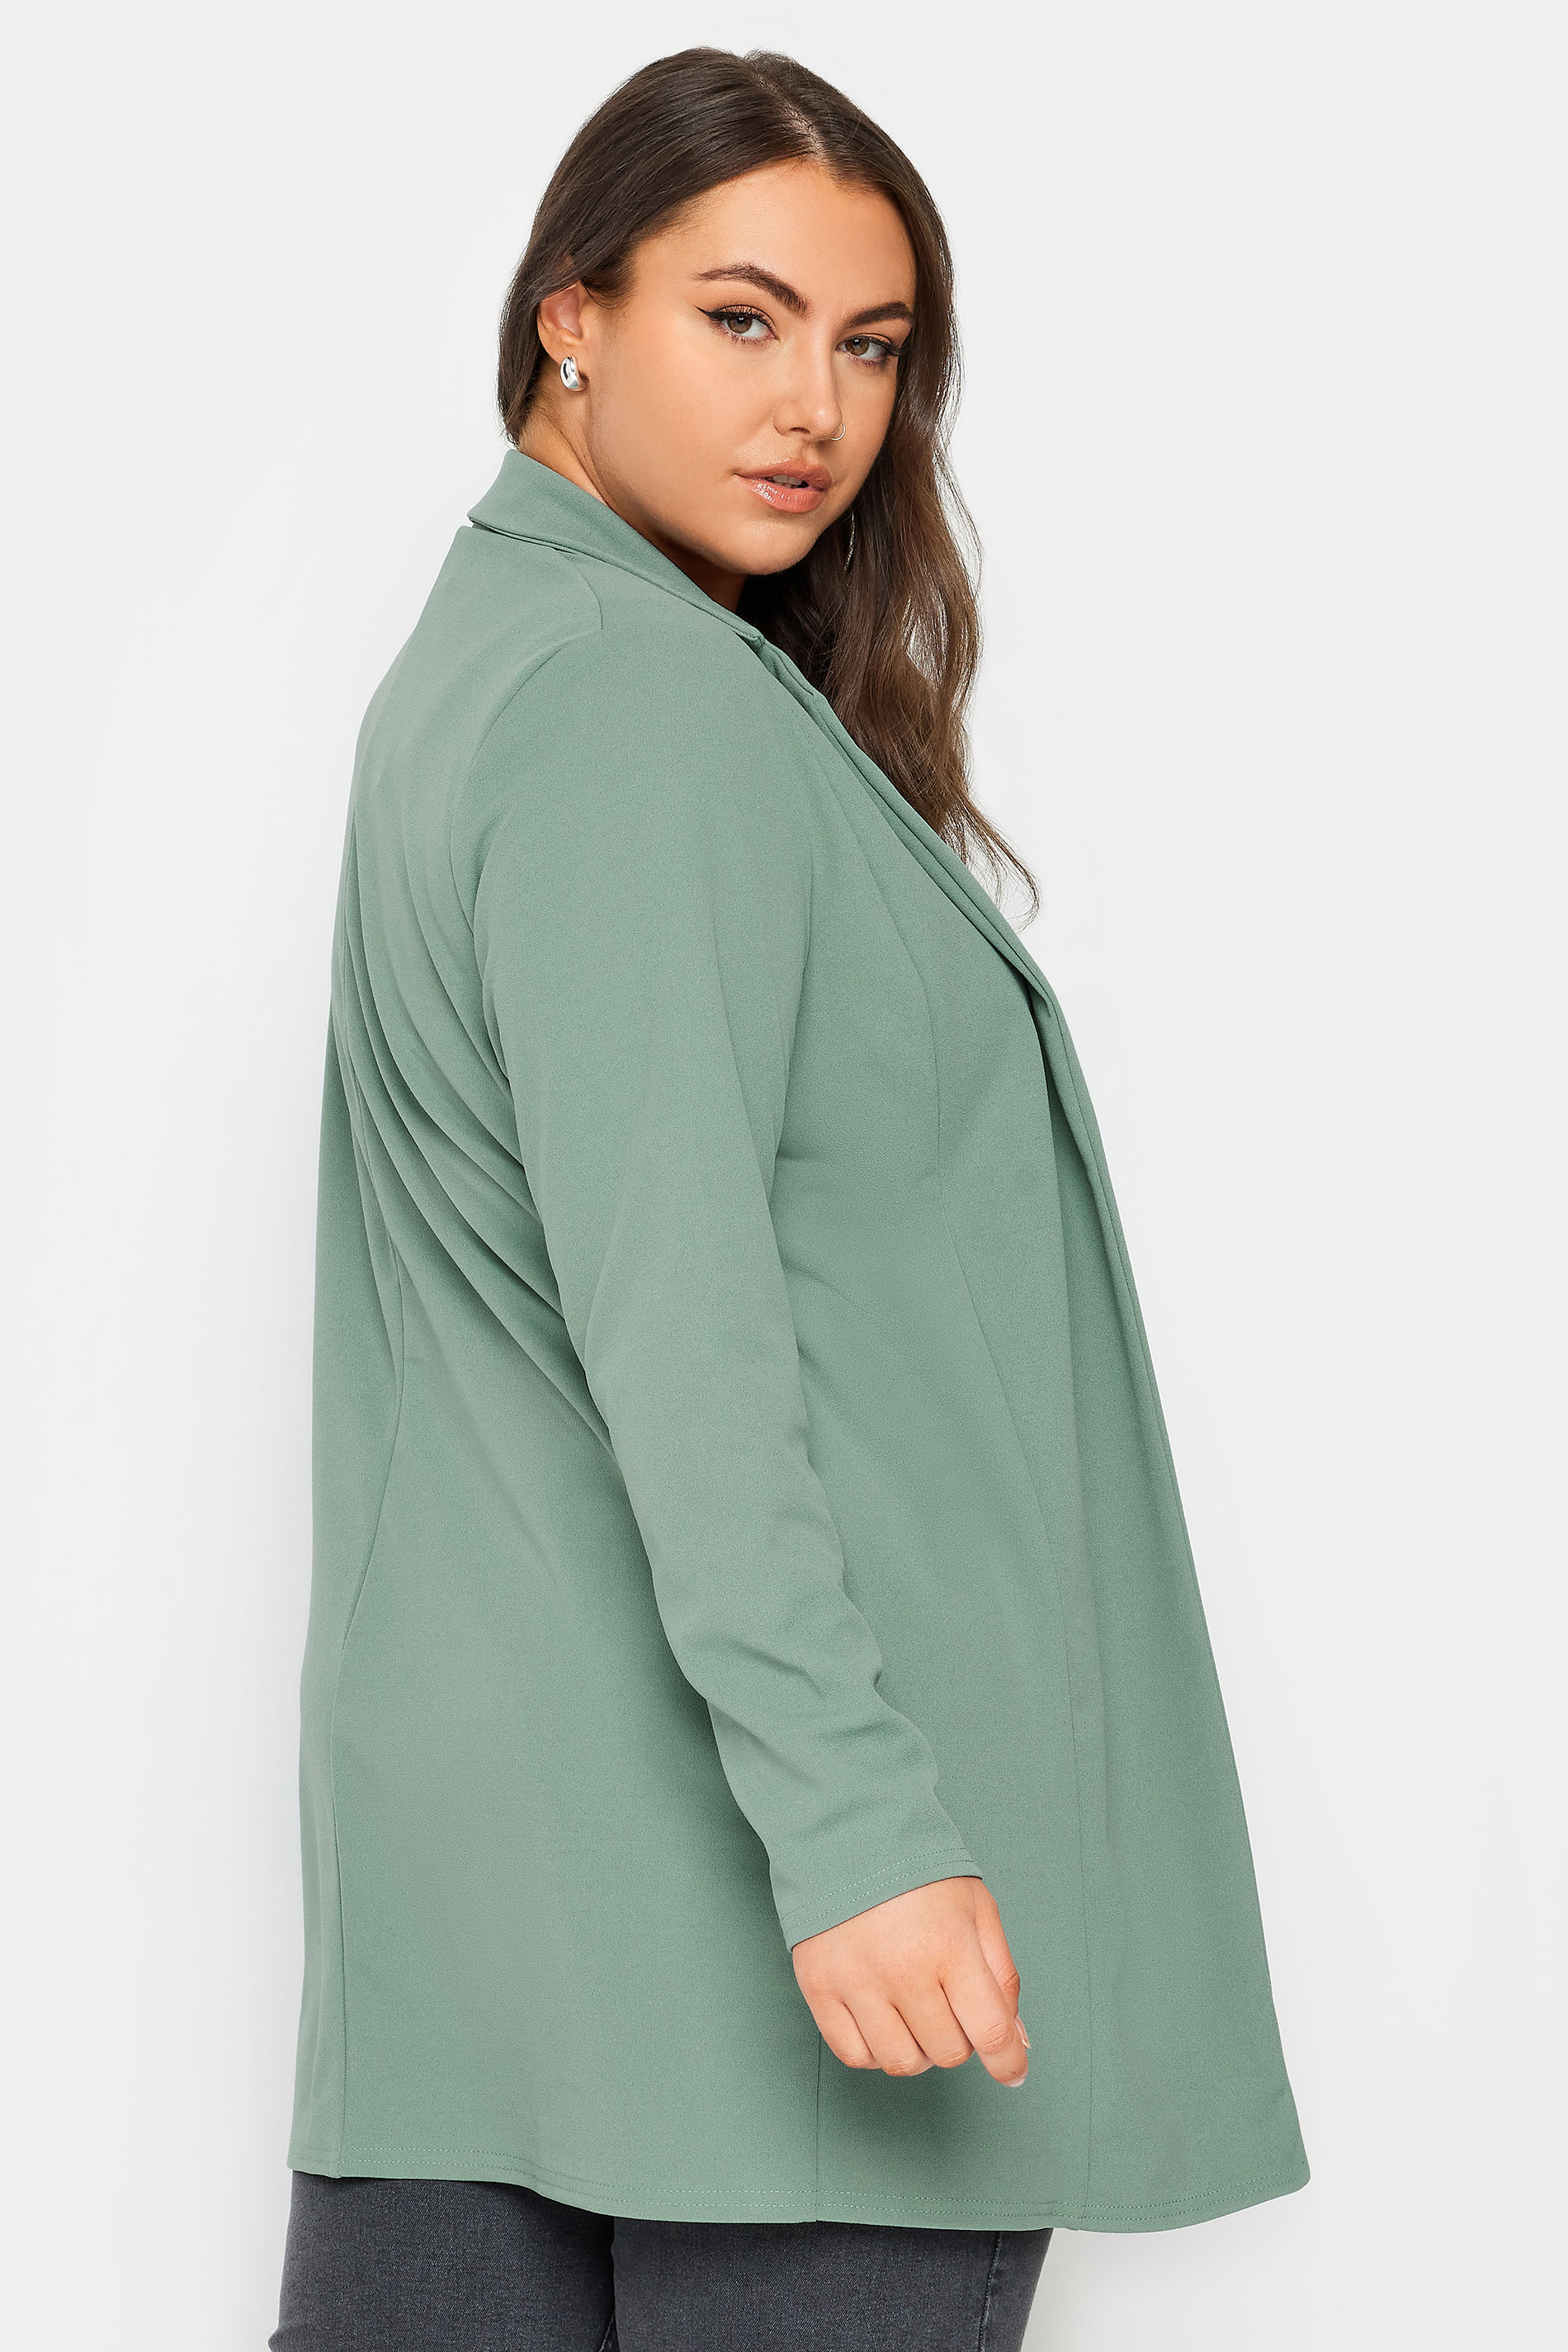 YOURS Plus Size Sage Green Blazer | Yours Clothing 3